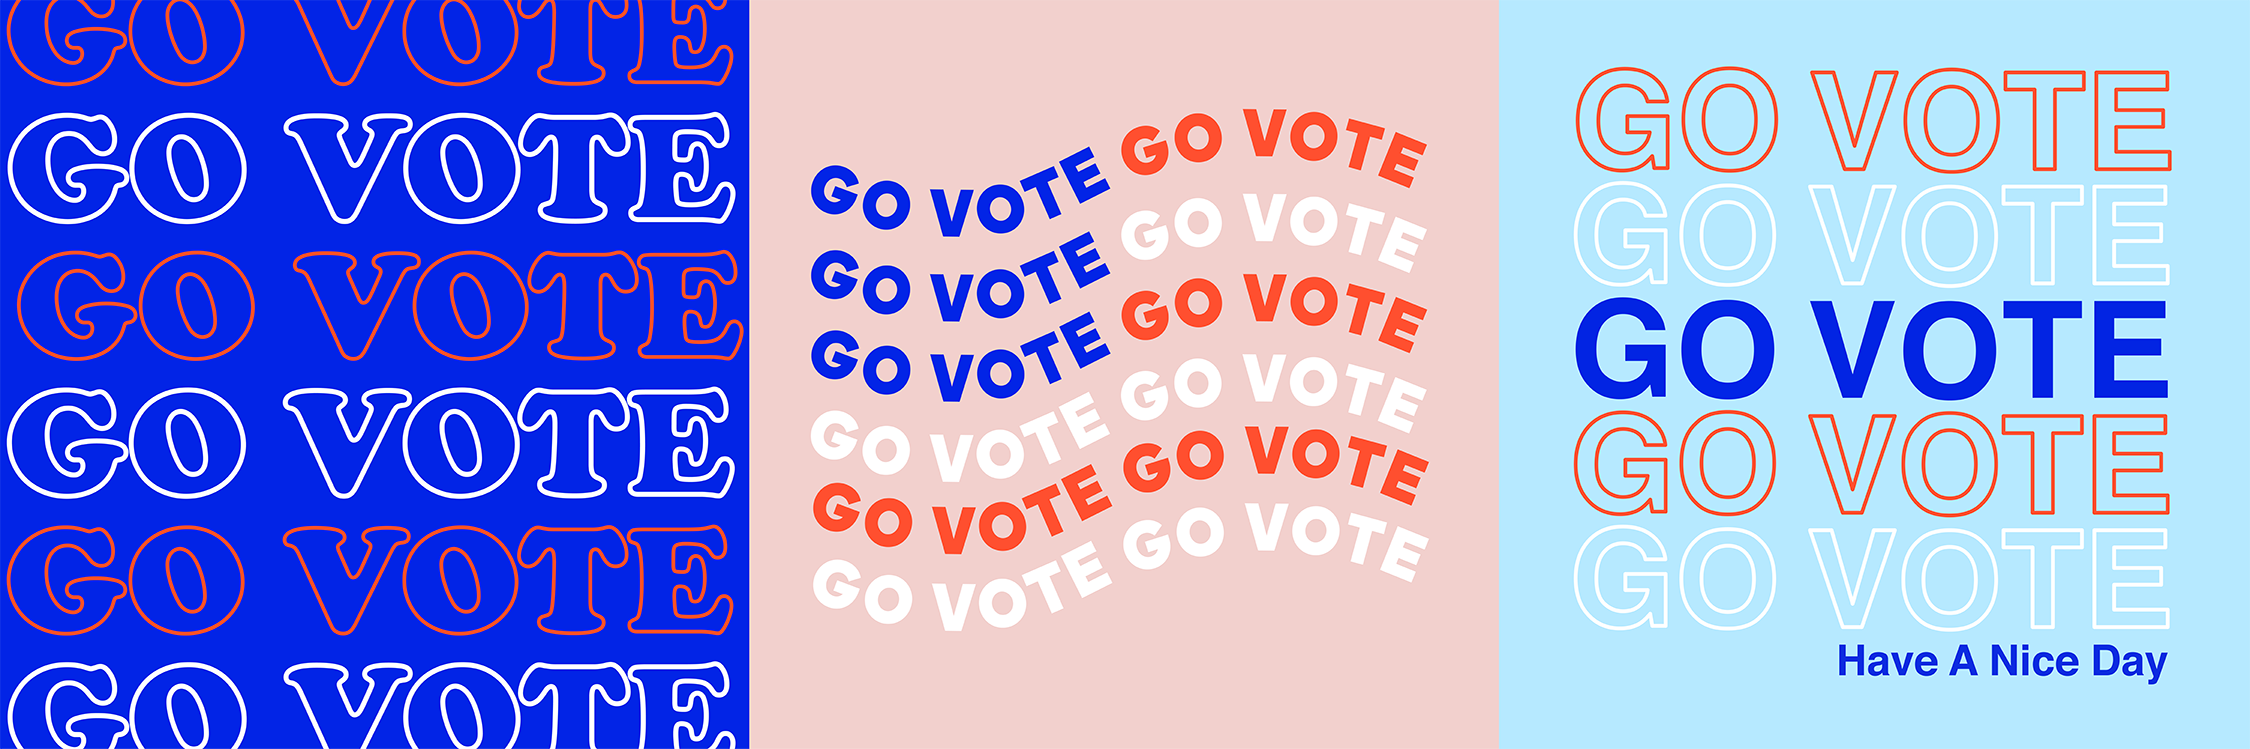 GoVote-08.png